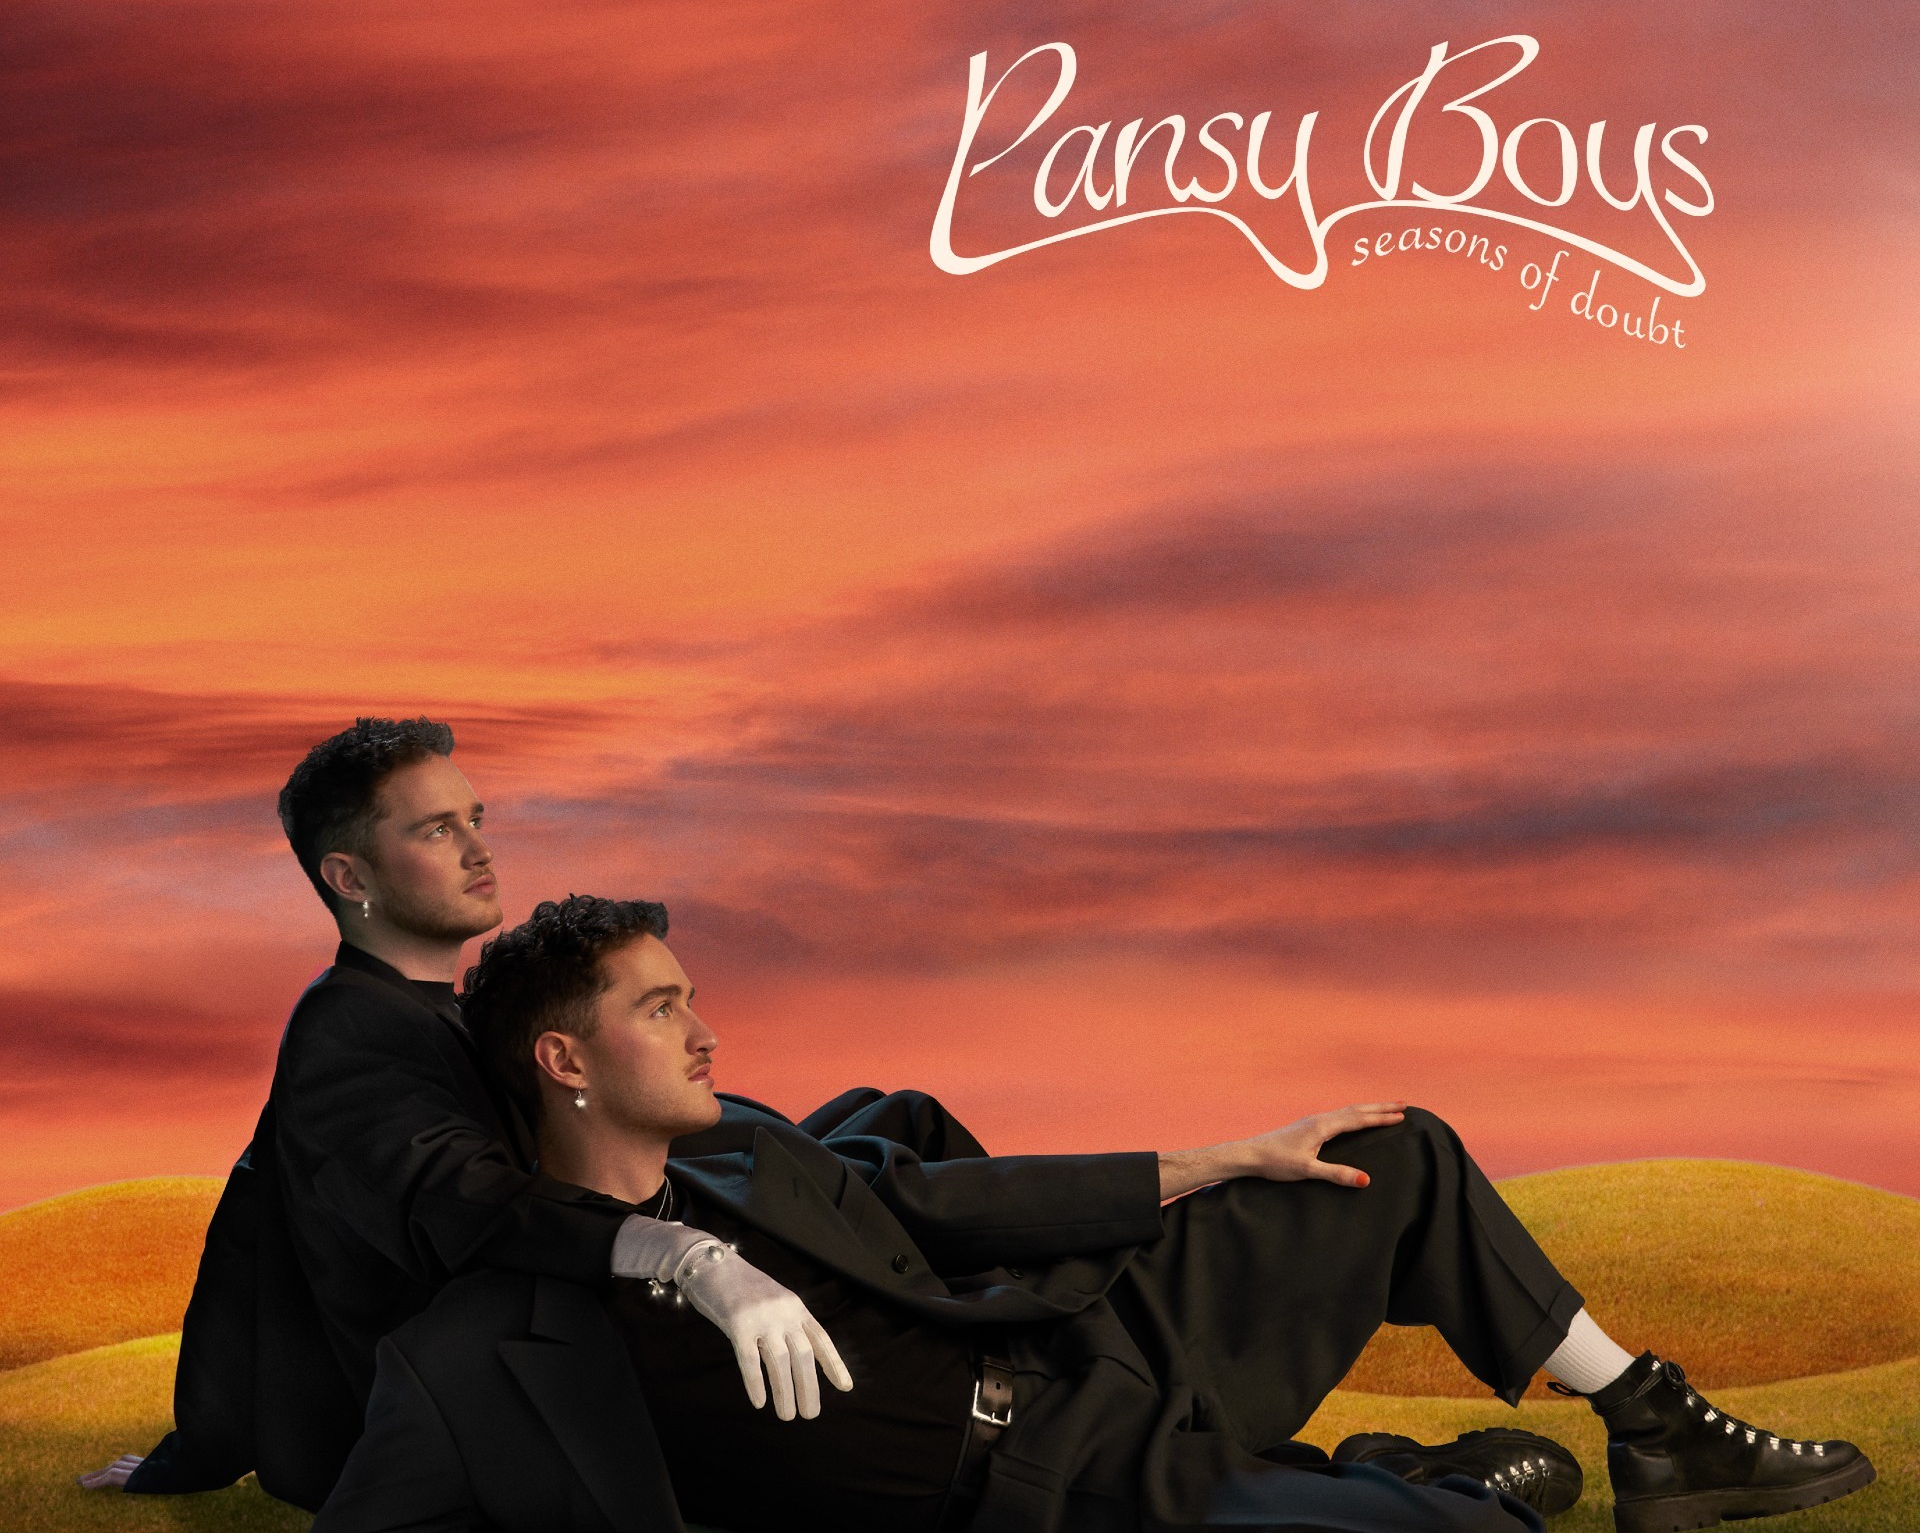 10 questions with musical duo Pansy Boys 